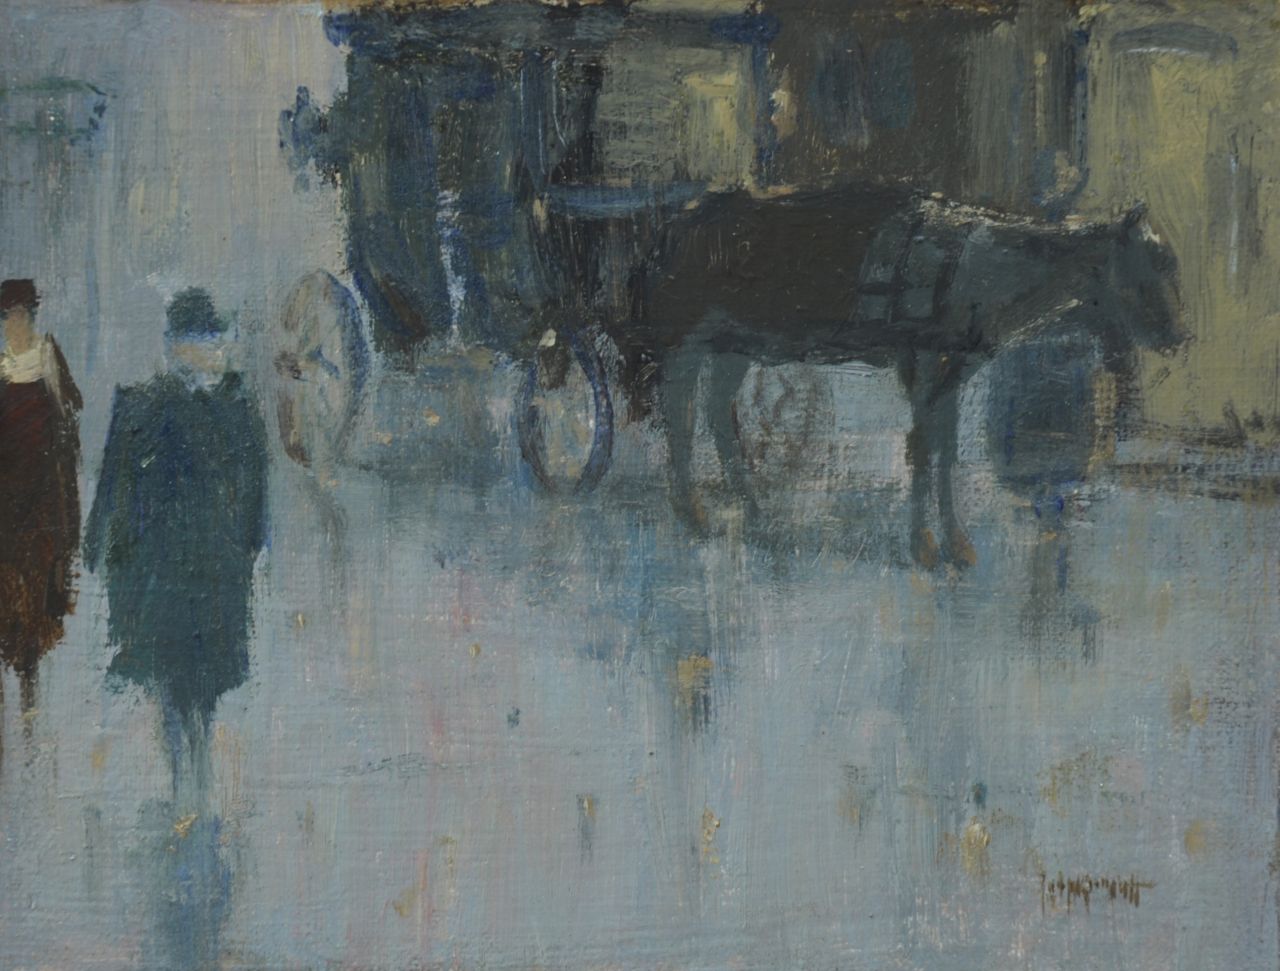 Kropff J.  | Johan 'Joop' Kropff, Waiting for passengers, oil on canvas laid down on panel 18.4 x 23.8 cm, signed l.r.